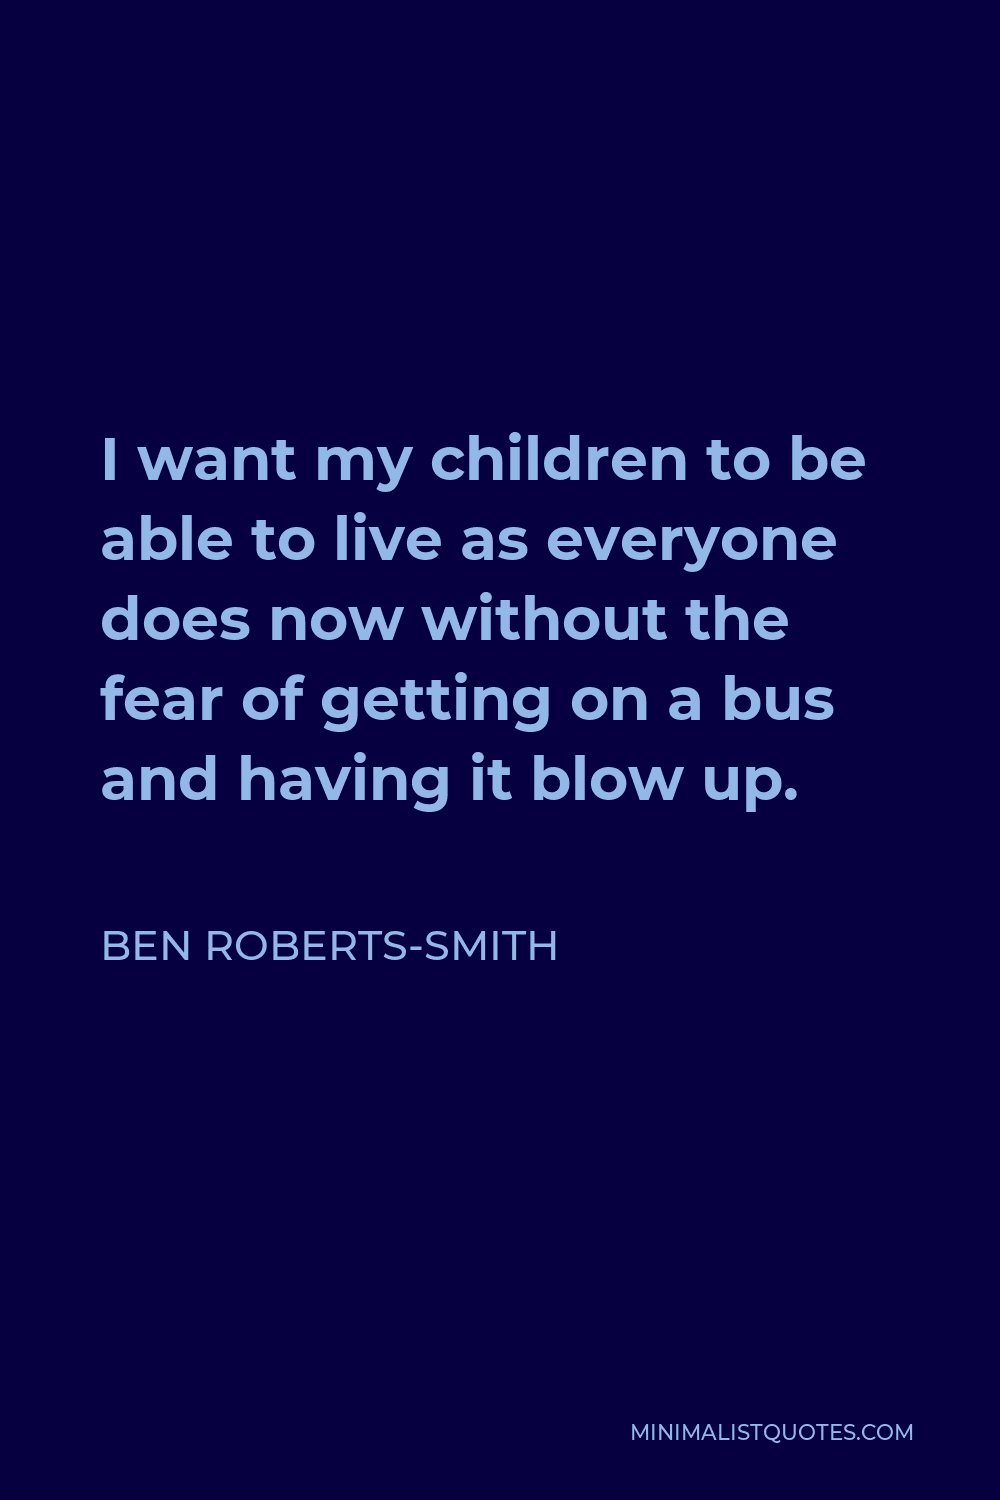 Ben Roberts-Smith Quote - I want my children to be able to live as everyone does now without the fear of getting on a bus and having it blow up.